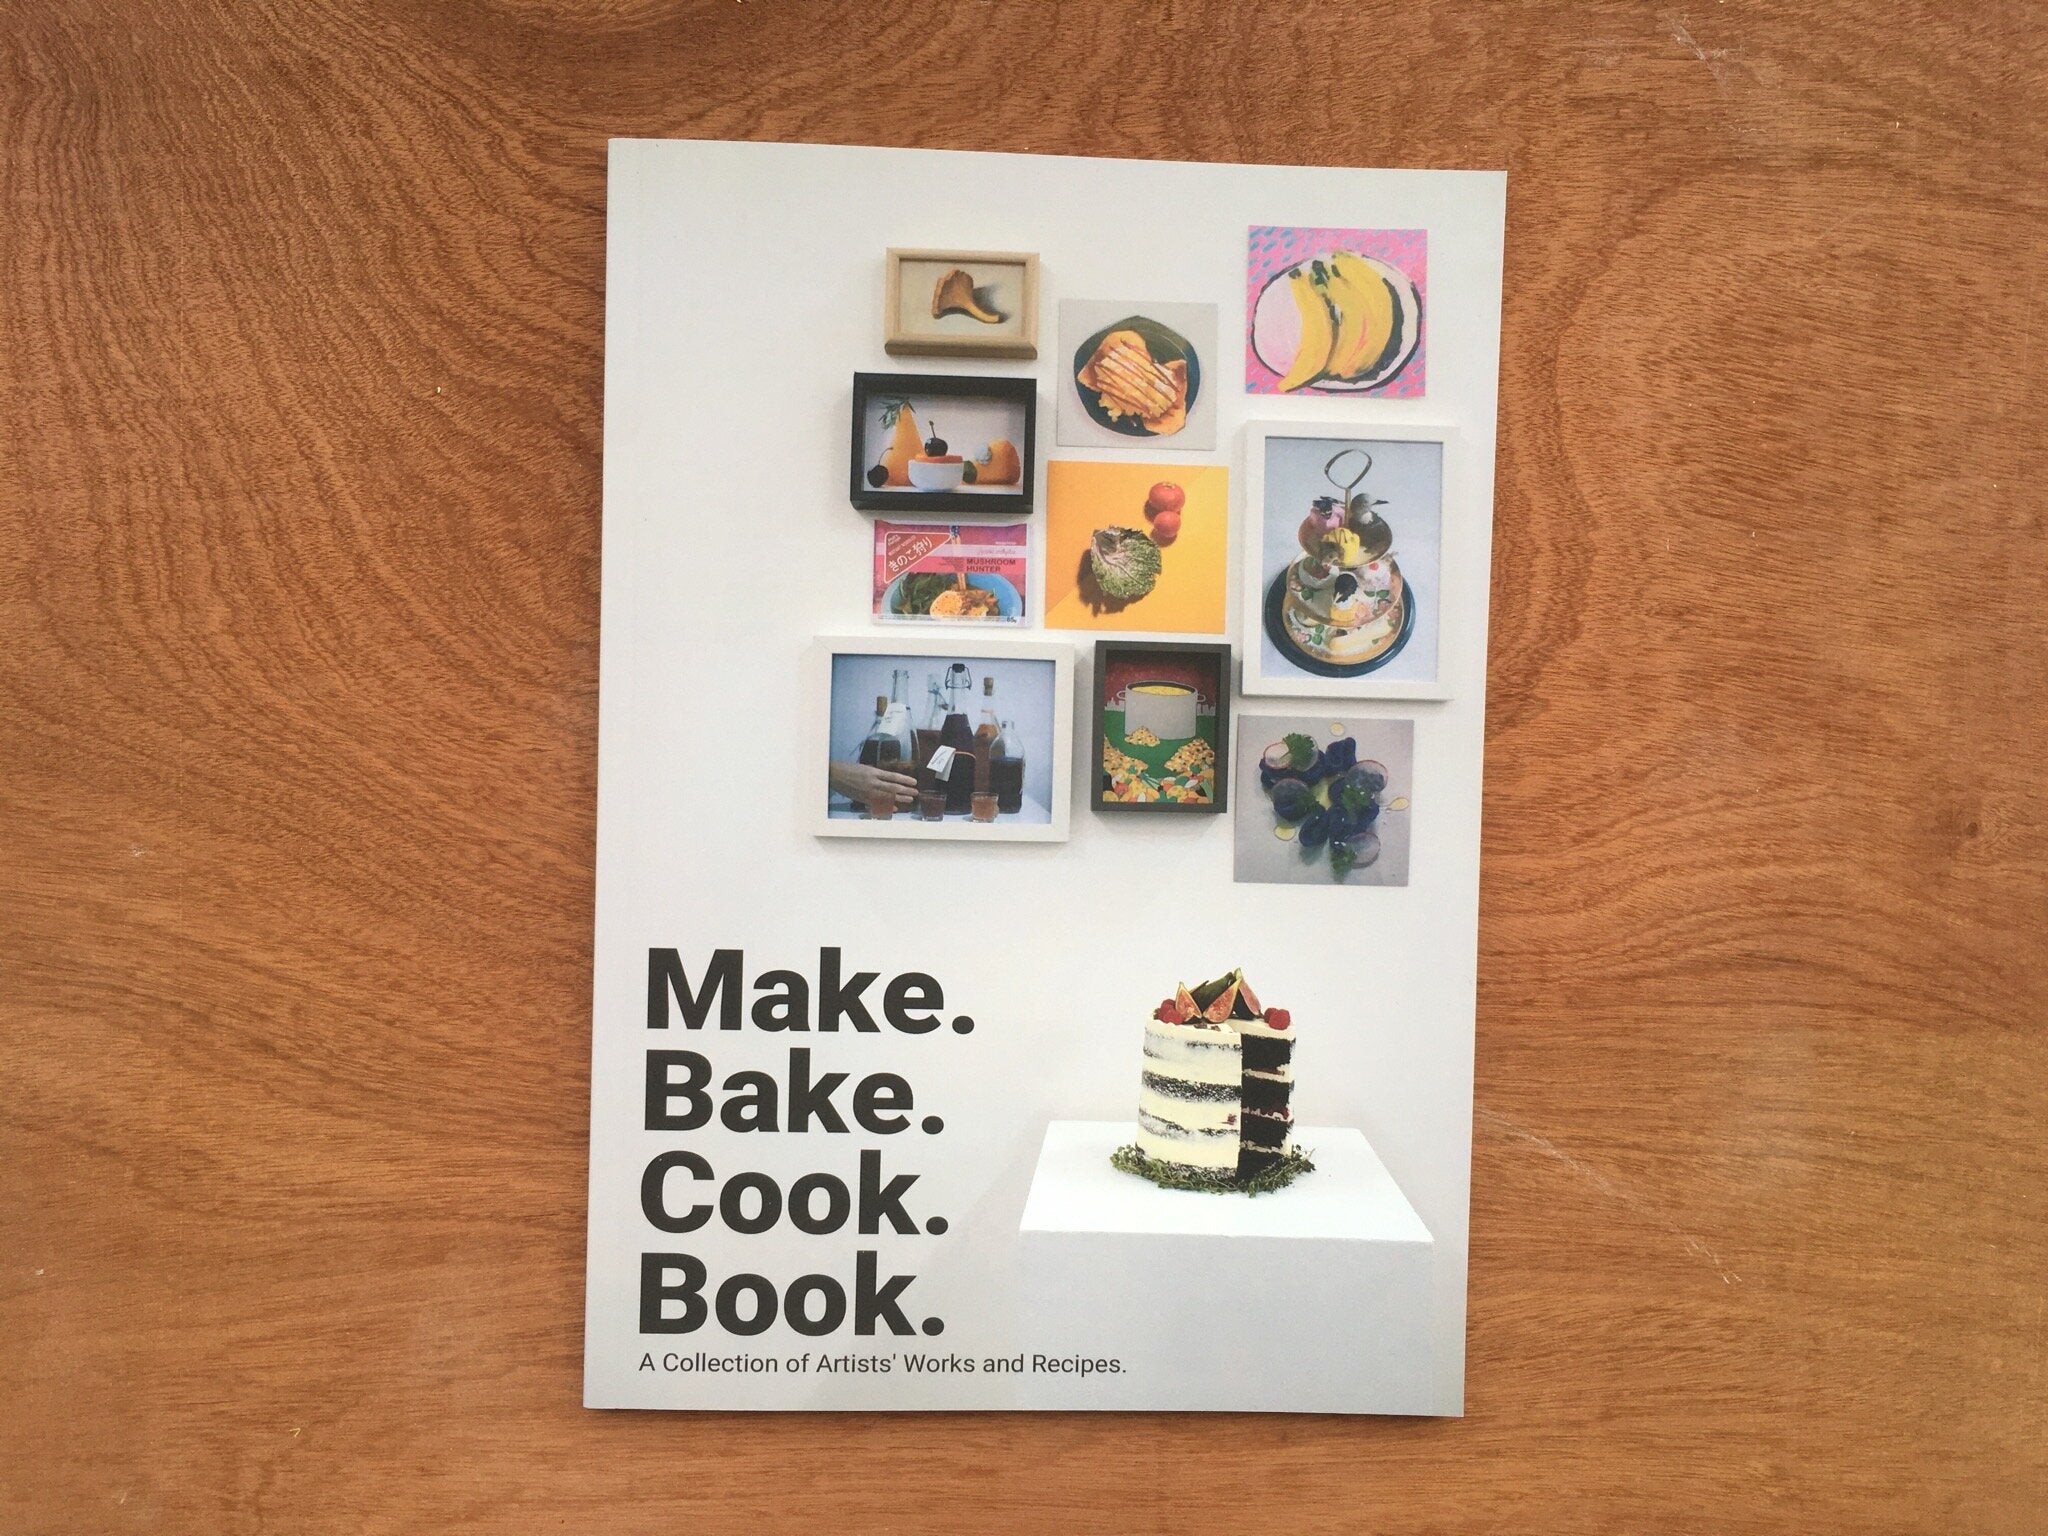 MAKE BAKE COOK BOOK: A COLLECTION OF ARTISTS' WORKS AND RECIPES